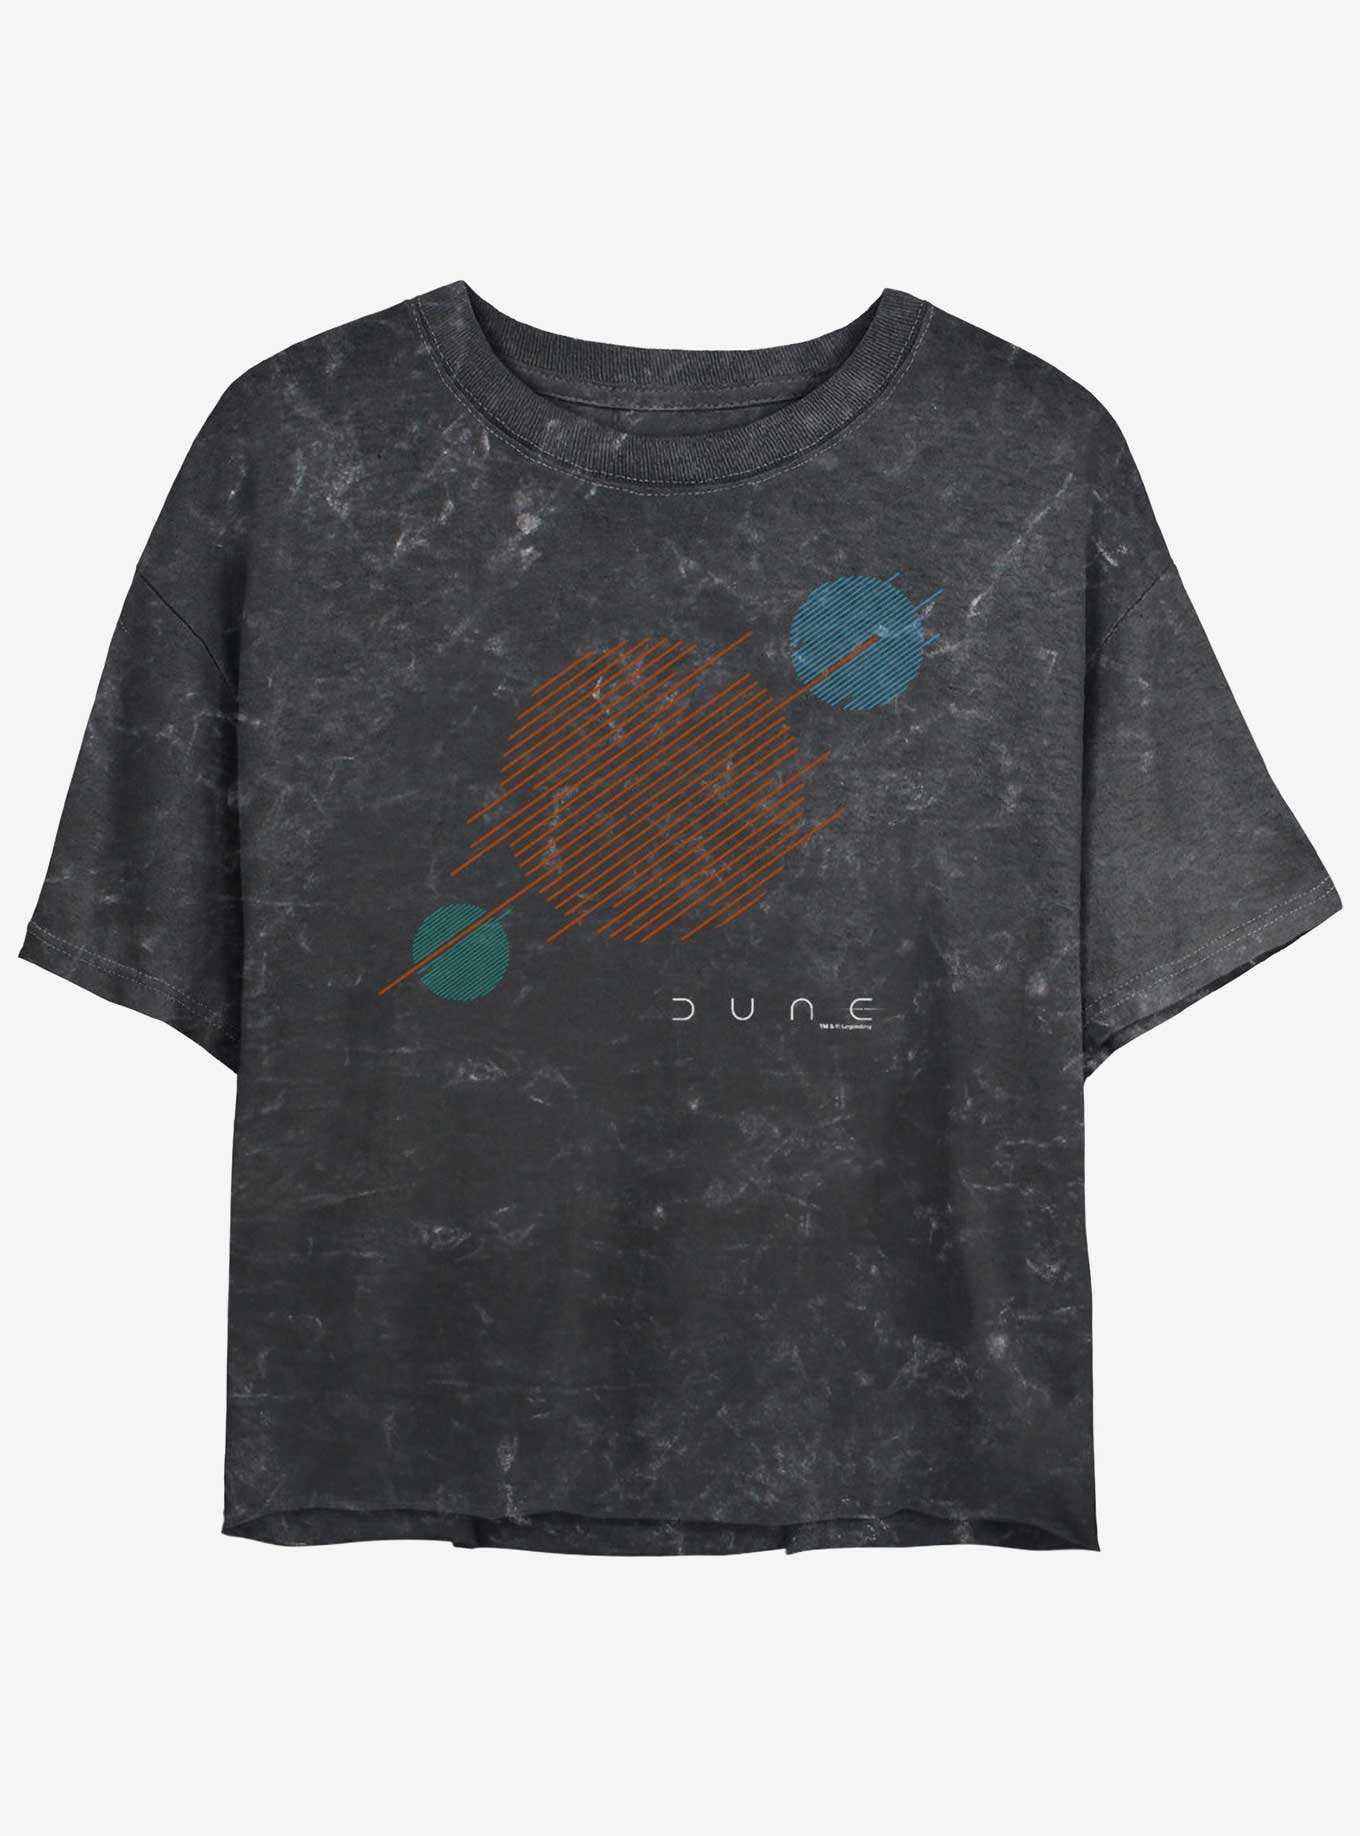 Dune: Part Two Universe Icons Mineral Wash Girls Crop T-Shirt, , hi-res